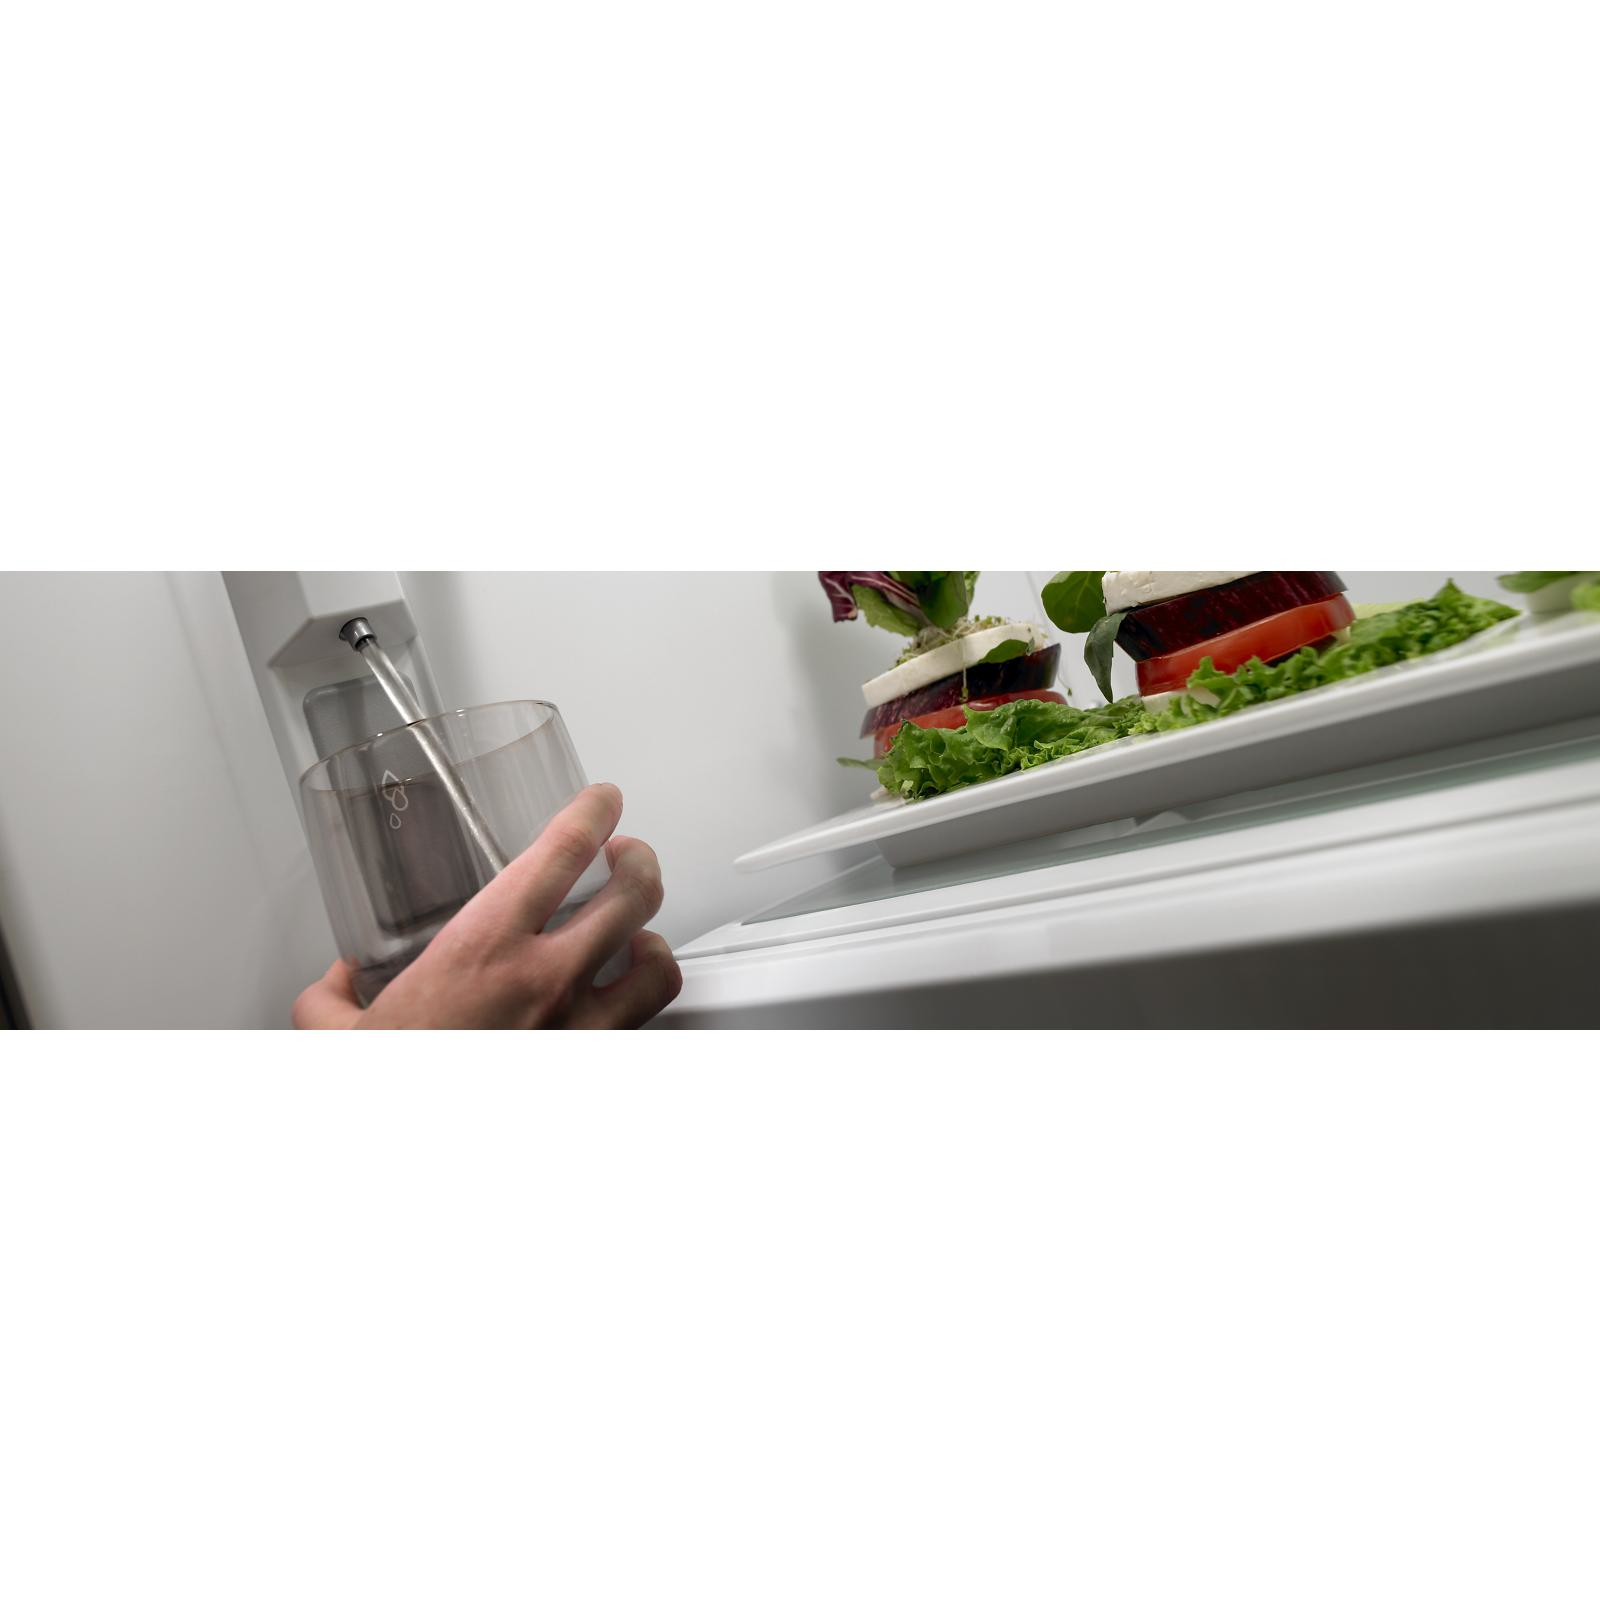 JennAir - 35.625 Inch 21.94 cu. ft French Door Refrigerator in Stainless - JFC2290REM